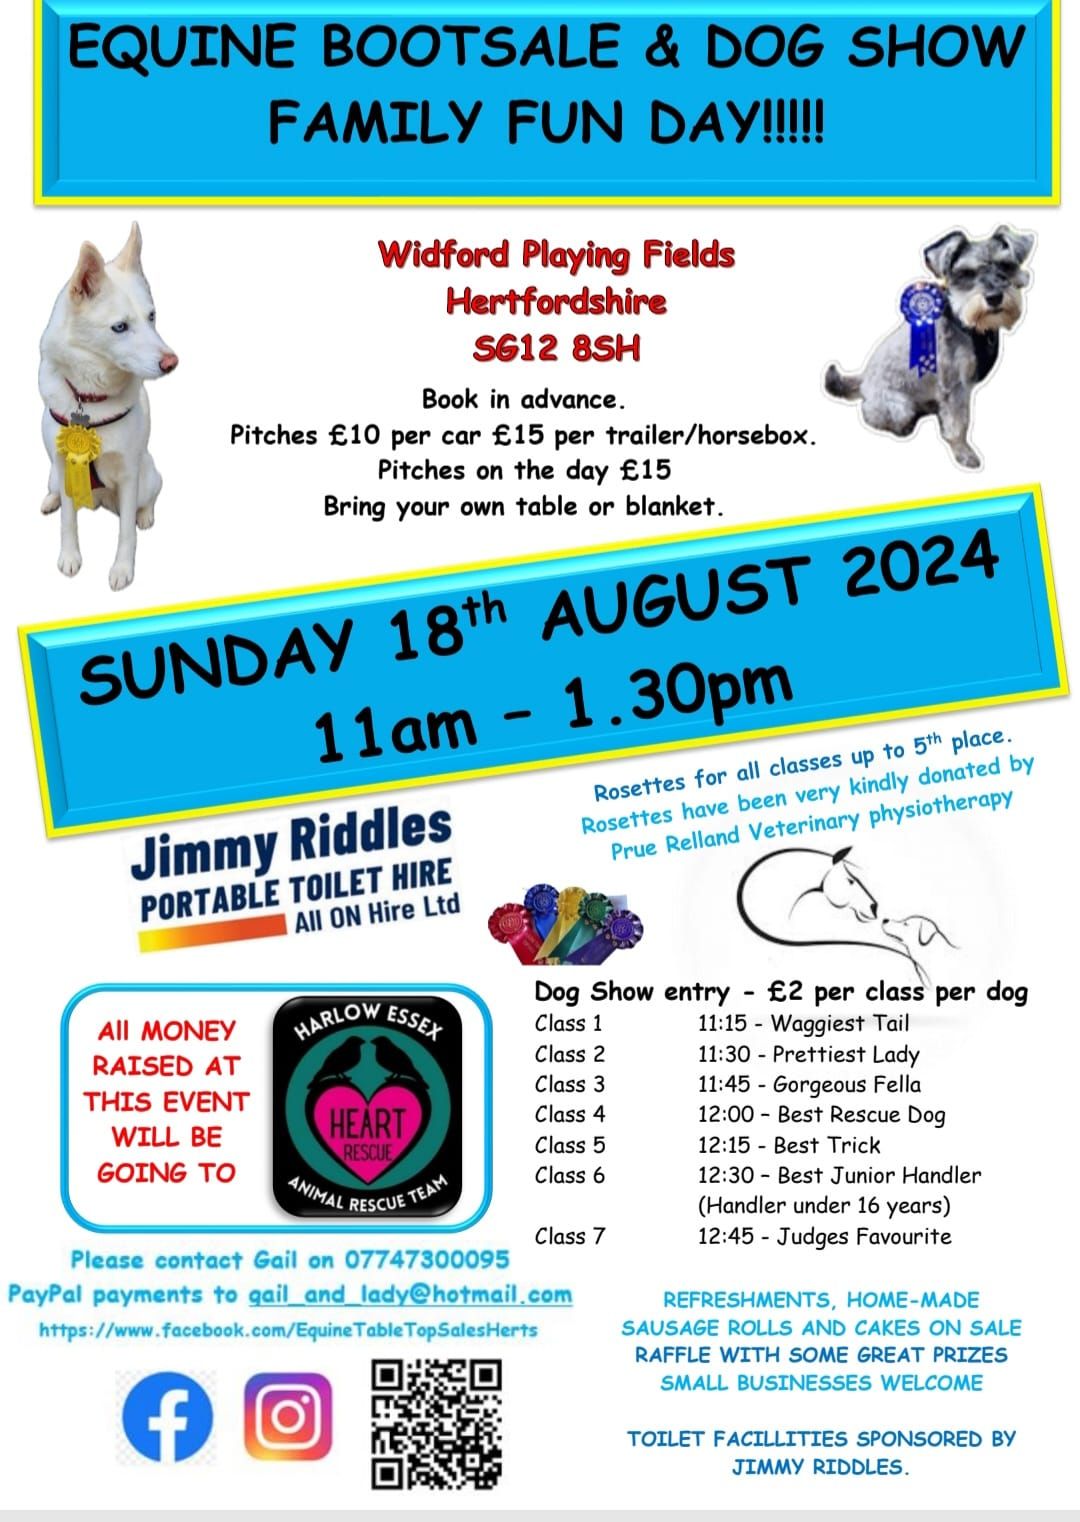 Equine Bootsale and Dog Show Family Fun day 